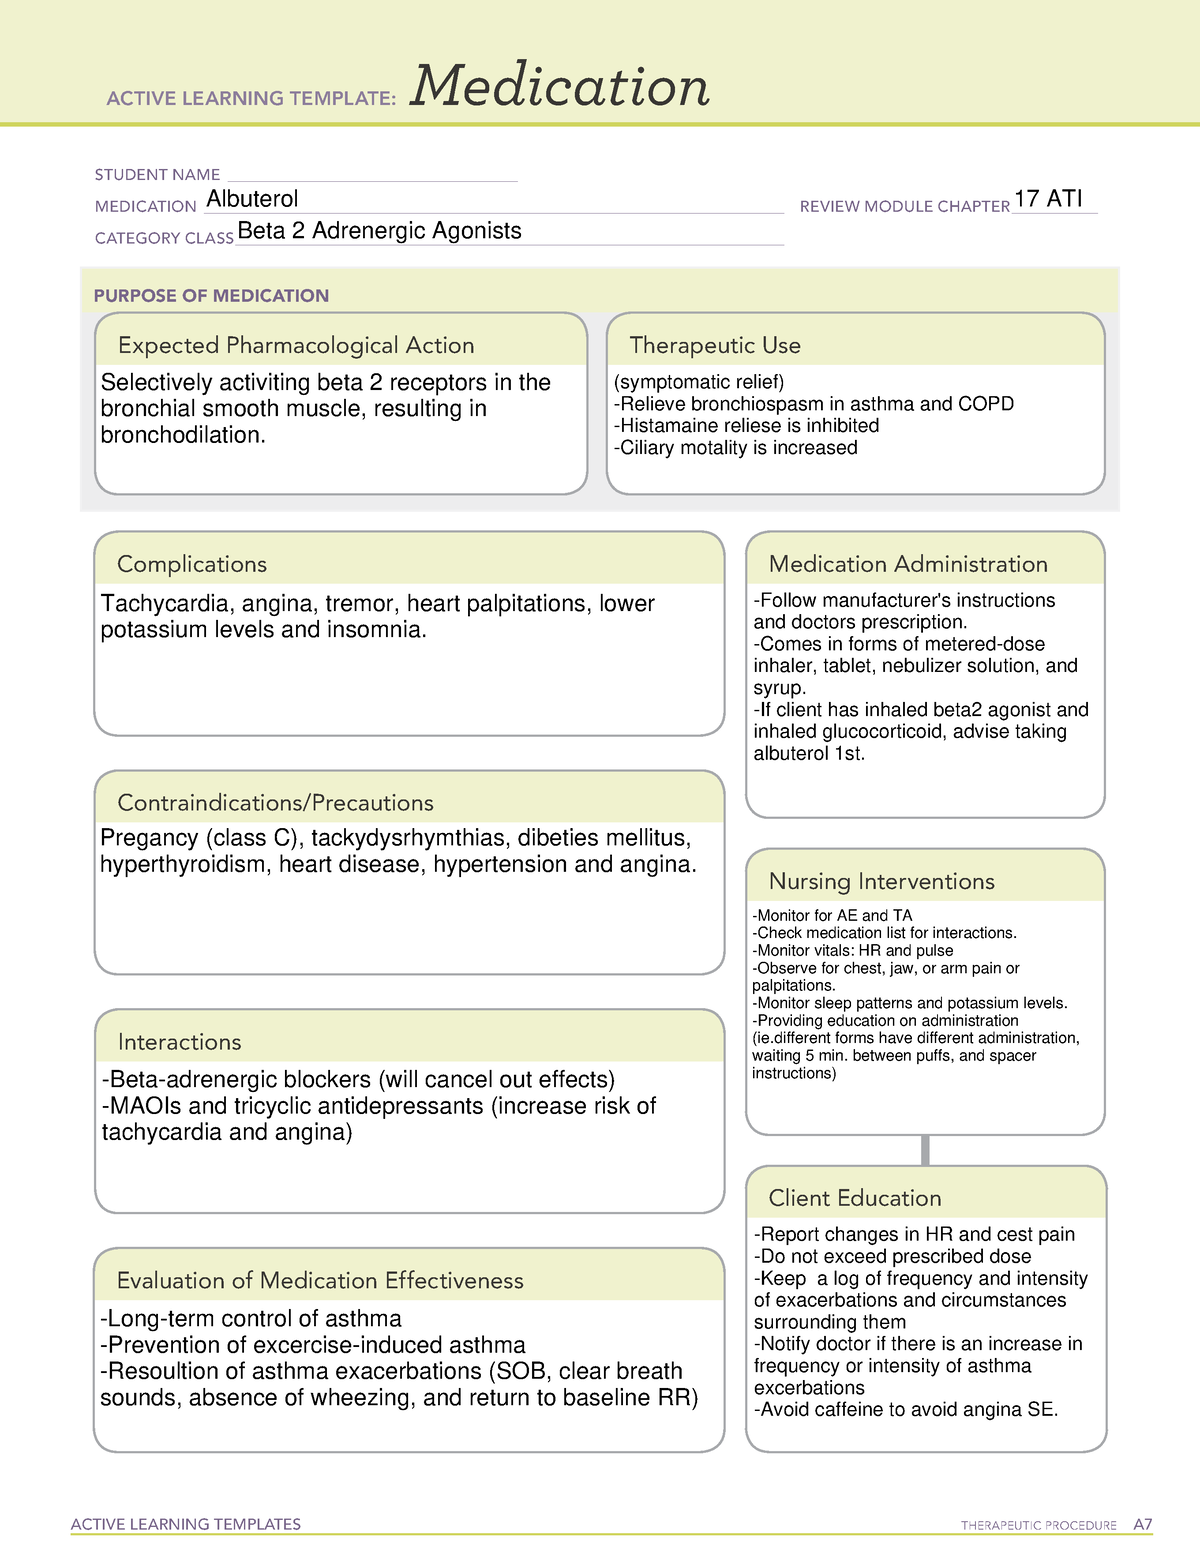 Albuterol Medication Active Learning Template ATI ACTIVE LEARNING